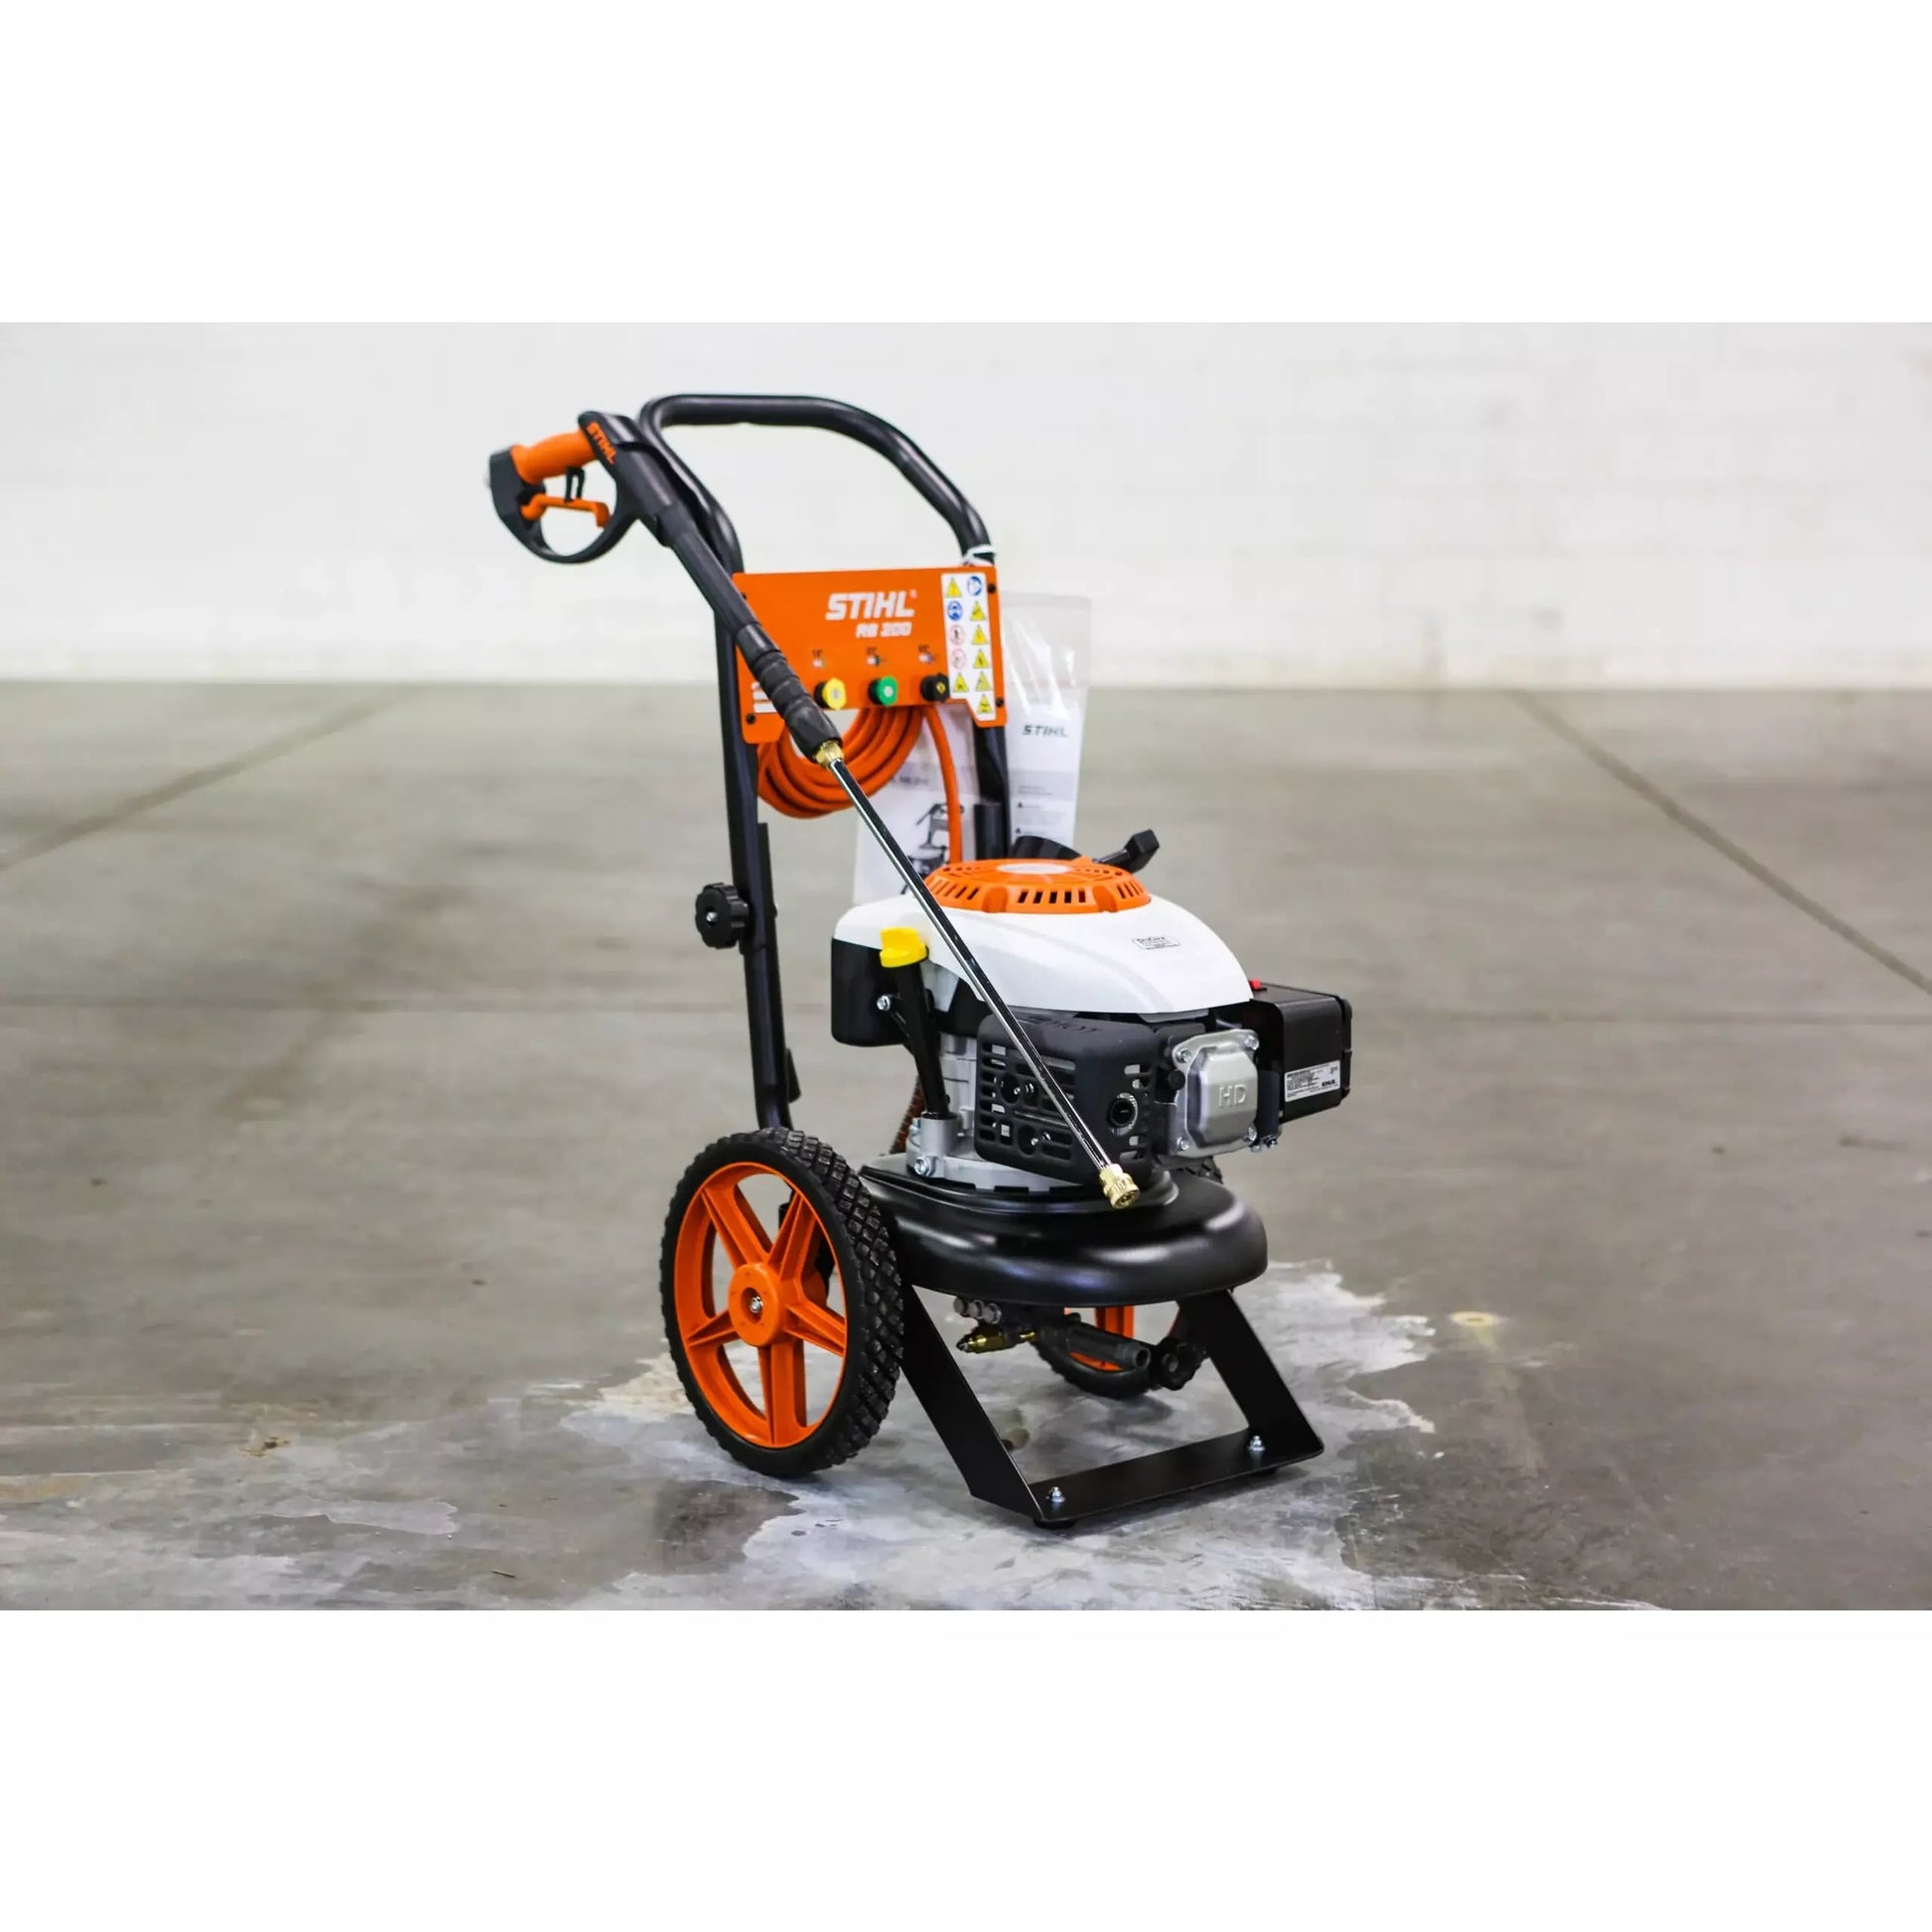 Buy STIHL RE 130 PLUS High Pressure Cleaner Online in India at Best Prices